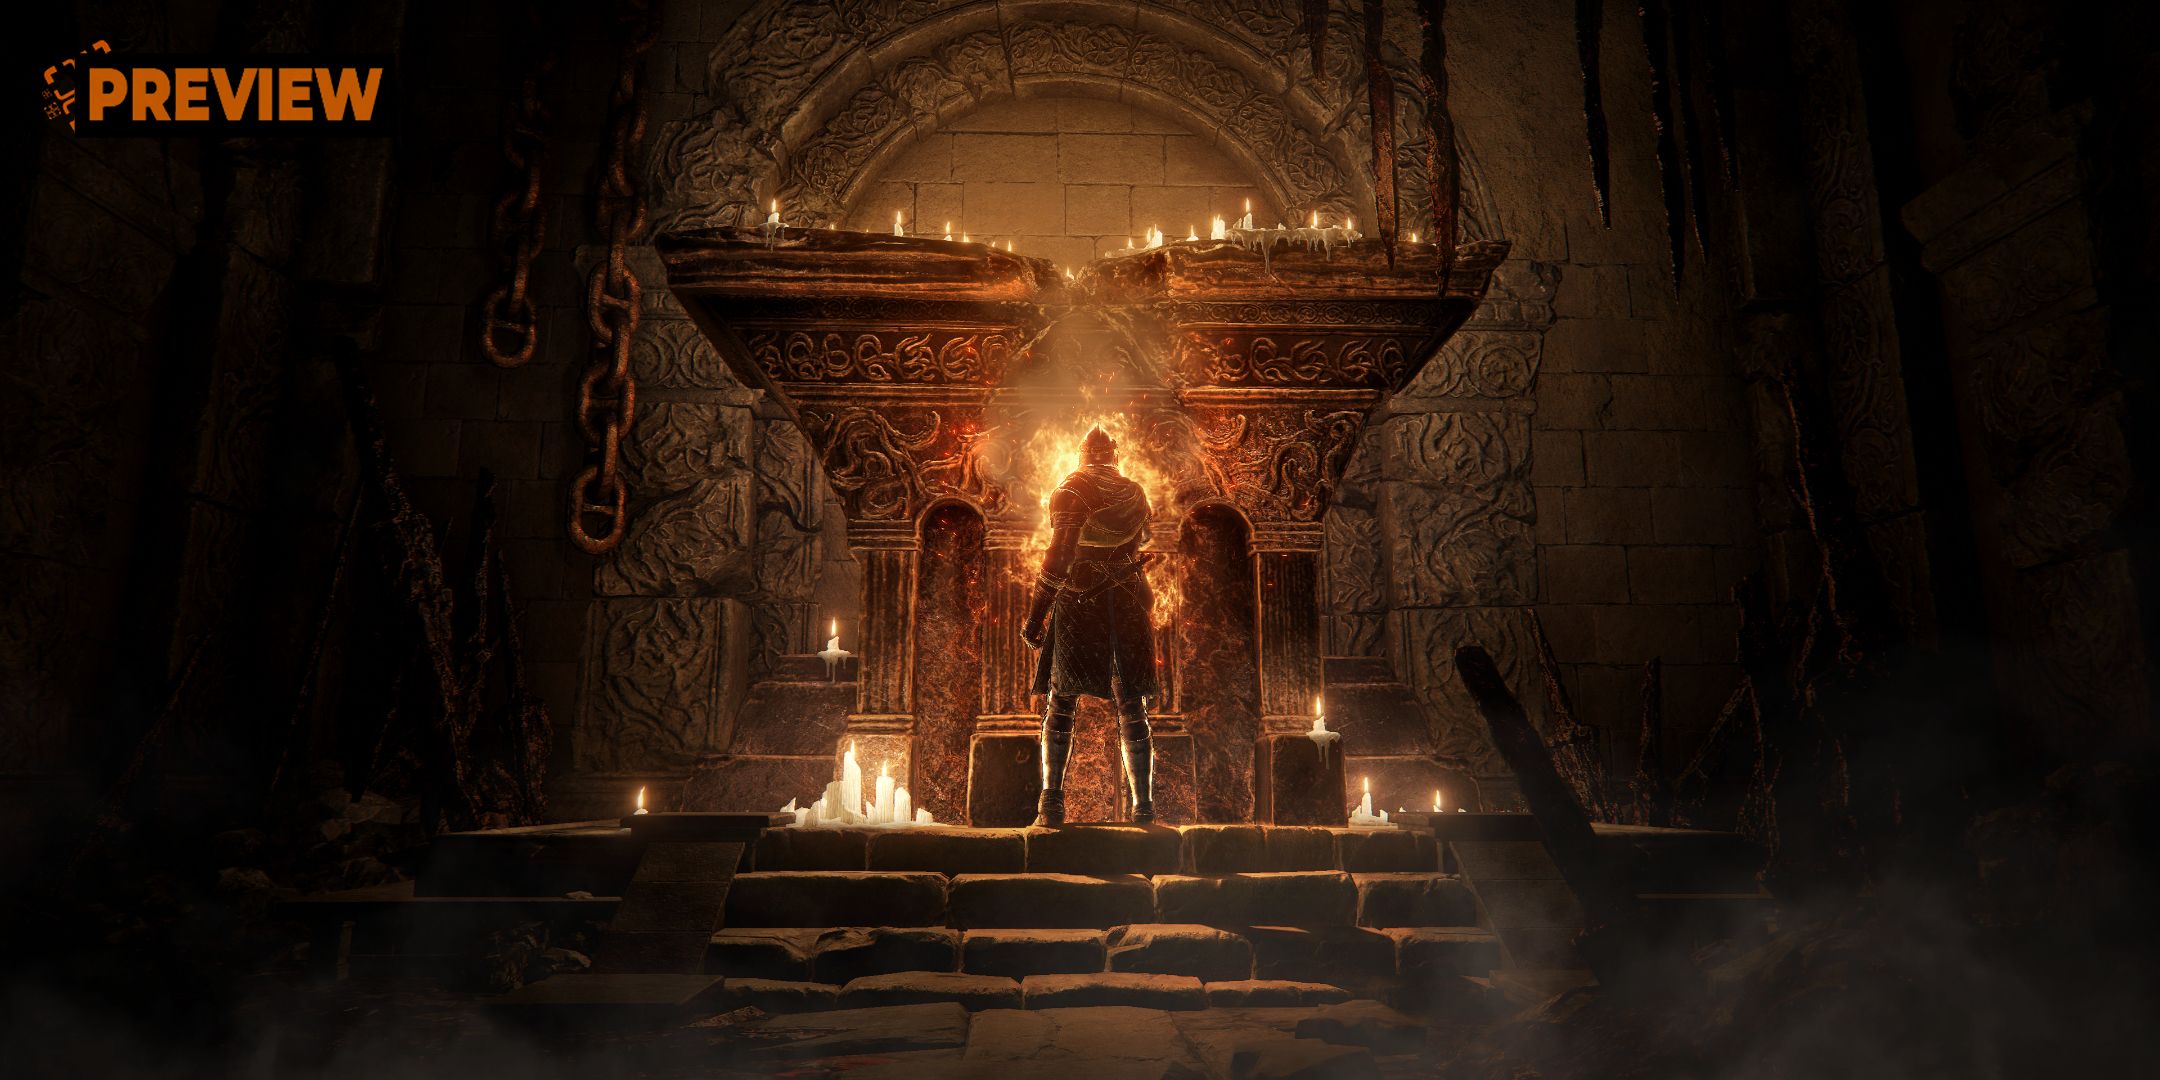 Elden Ring Shadow of the Erdtree DLC Preview Image - character stands in front of a flaming altar